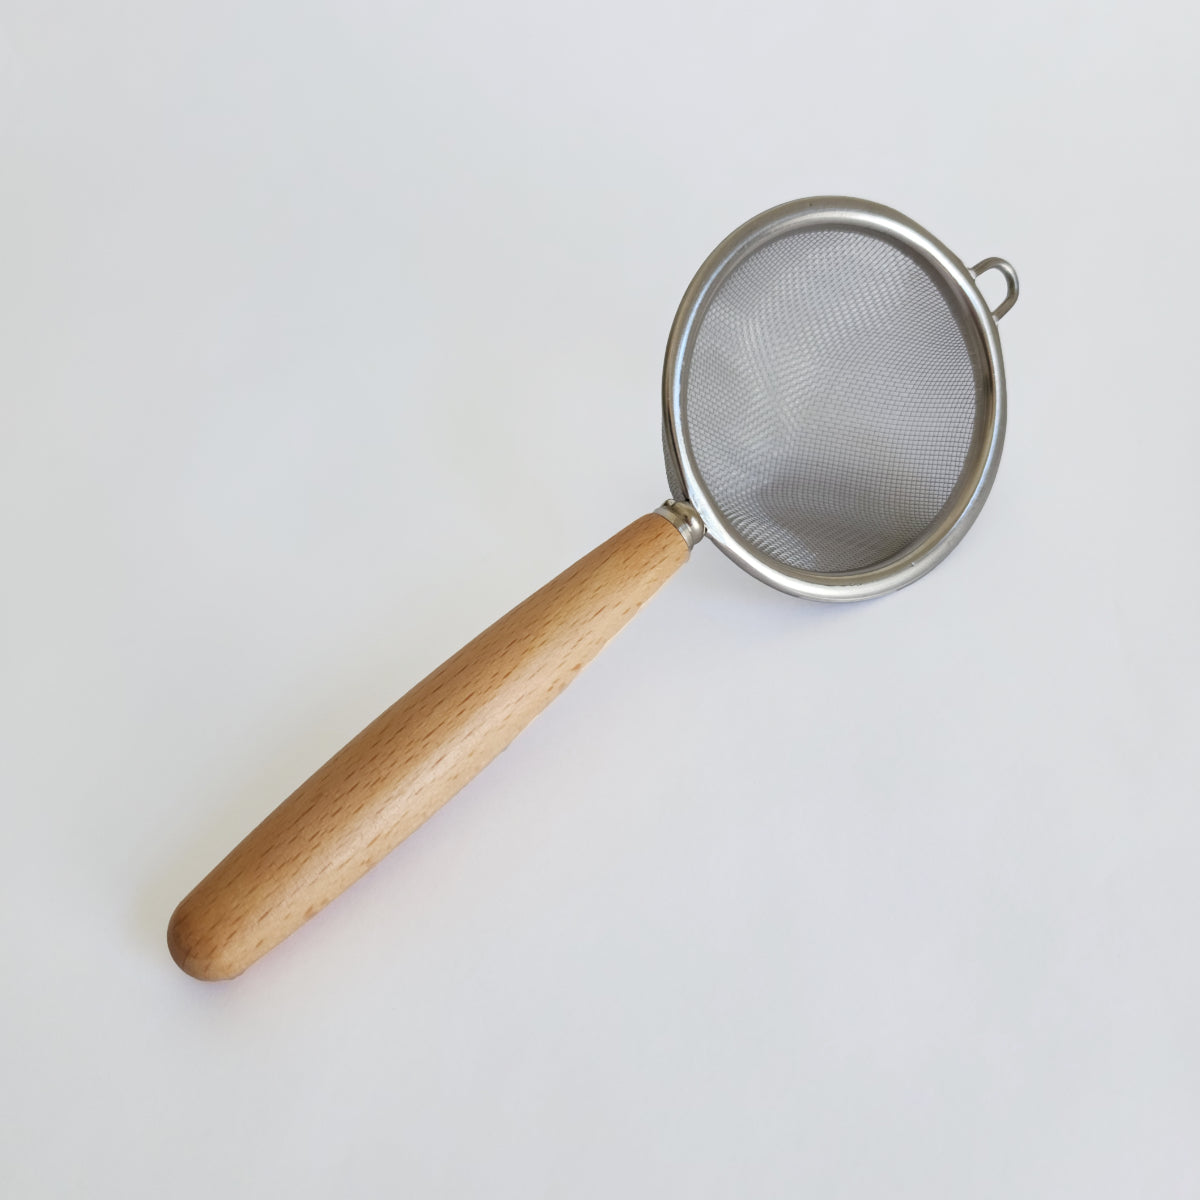 Matcha Sieve with Wooden Handle by Wabi